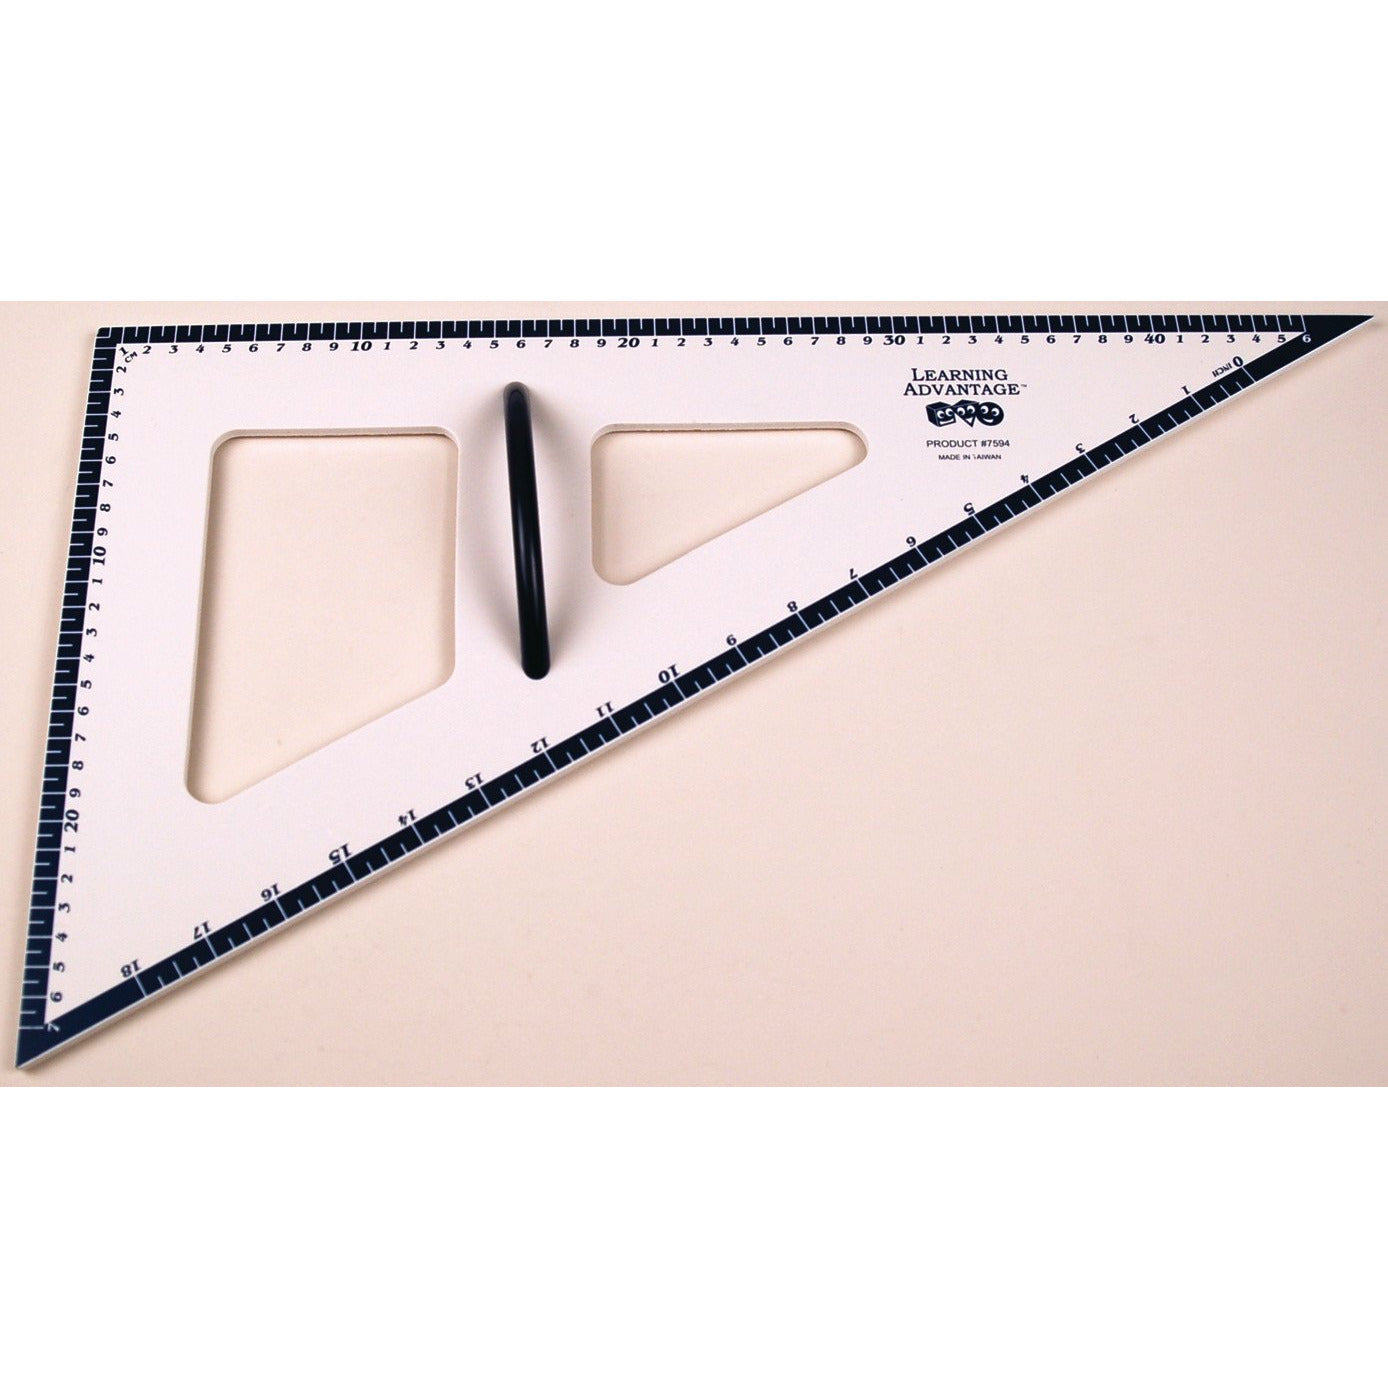 Magnetic Dry Erase Measurement Tool, 30/60/90 Triangle